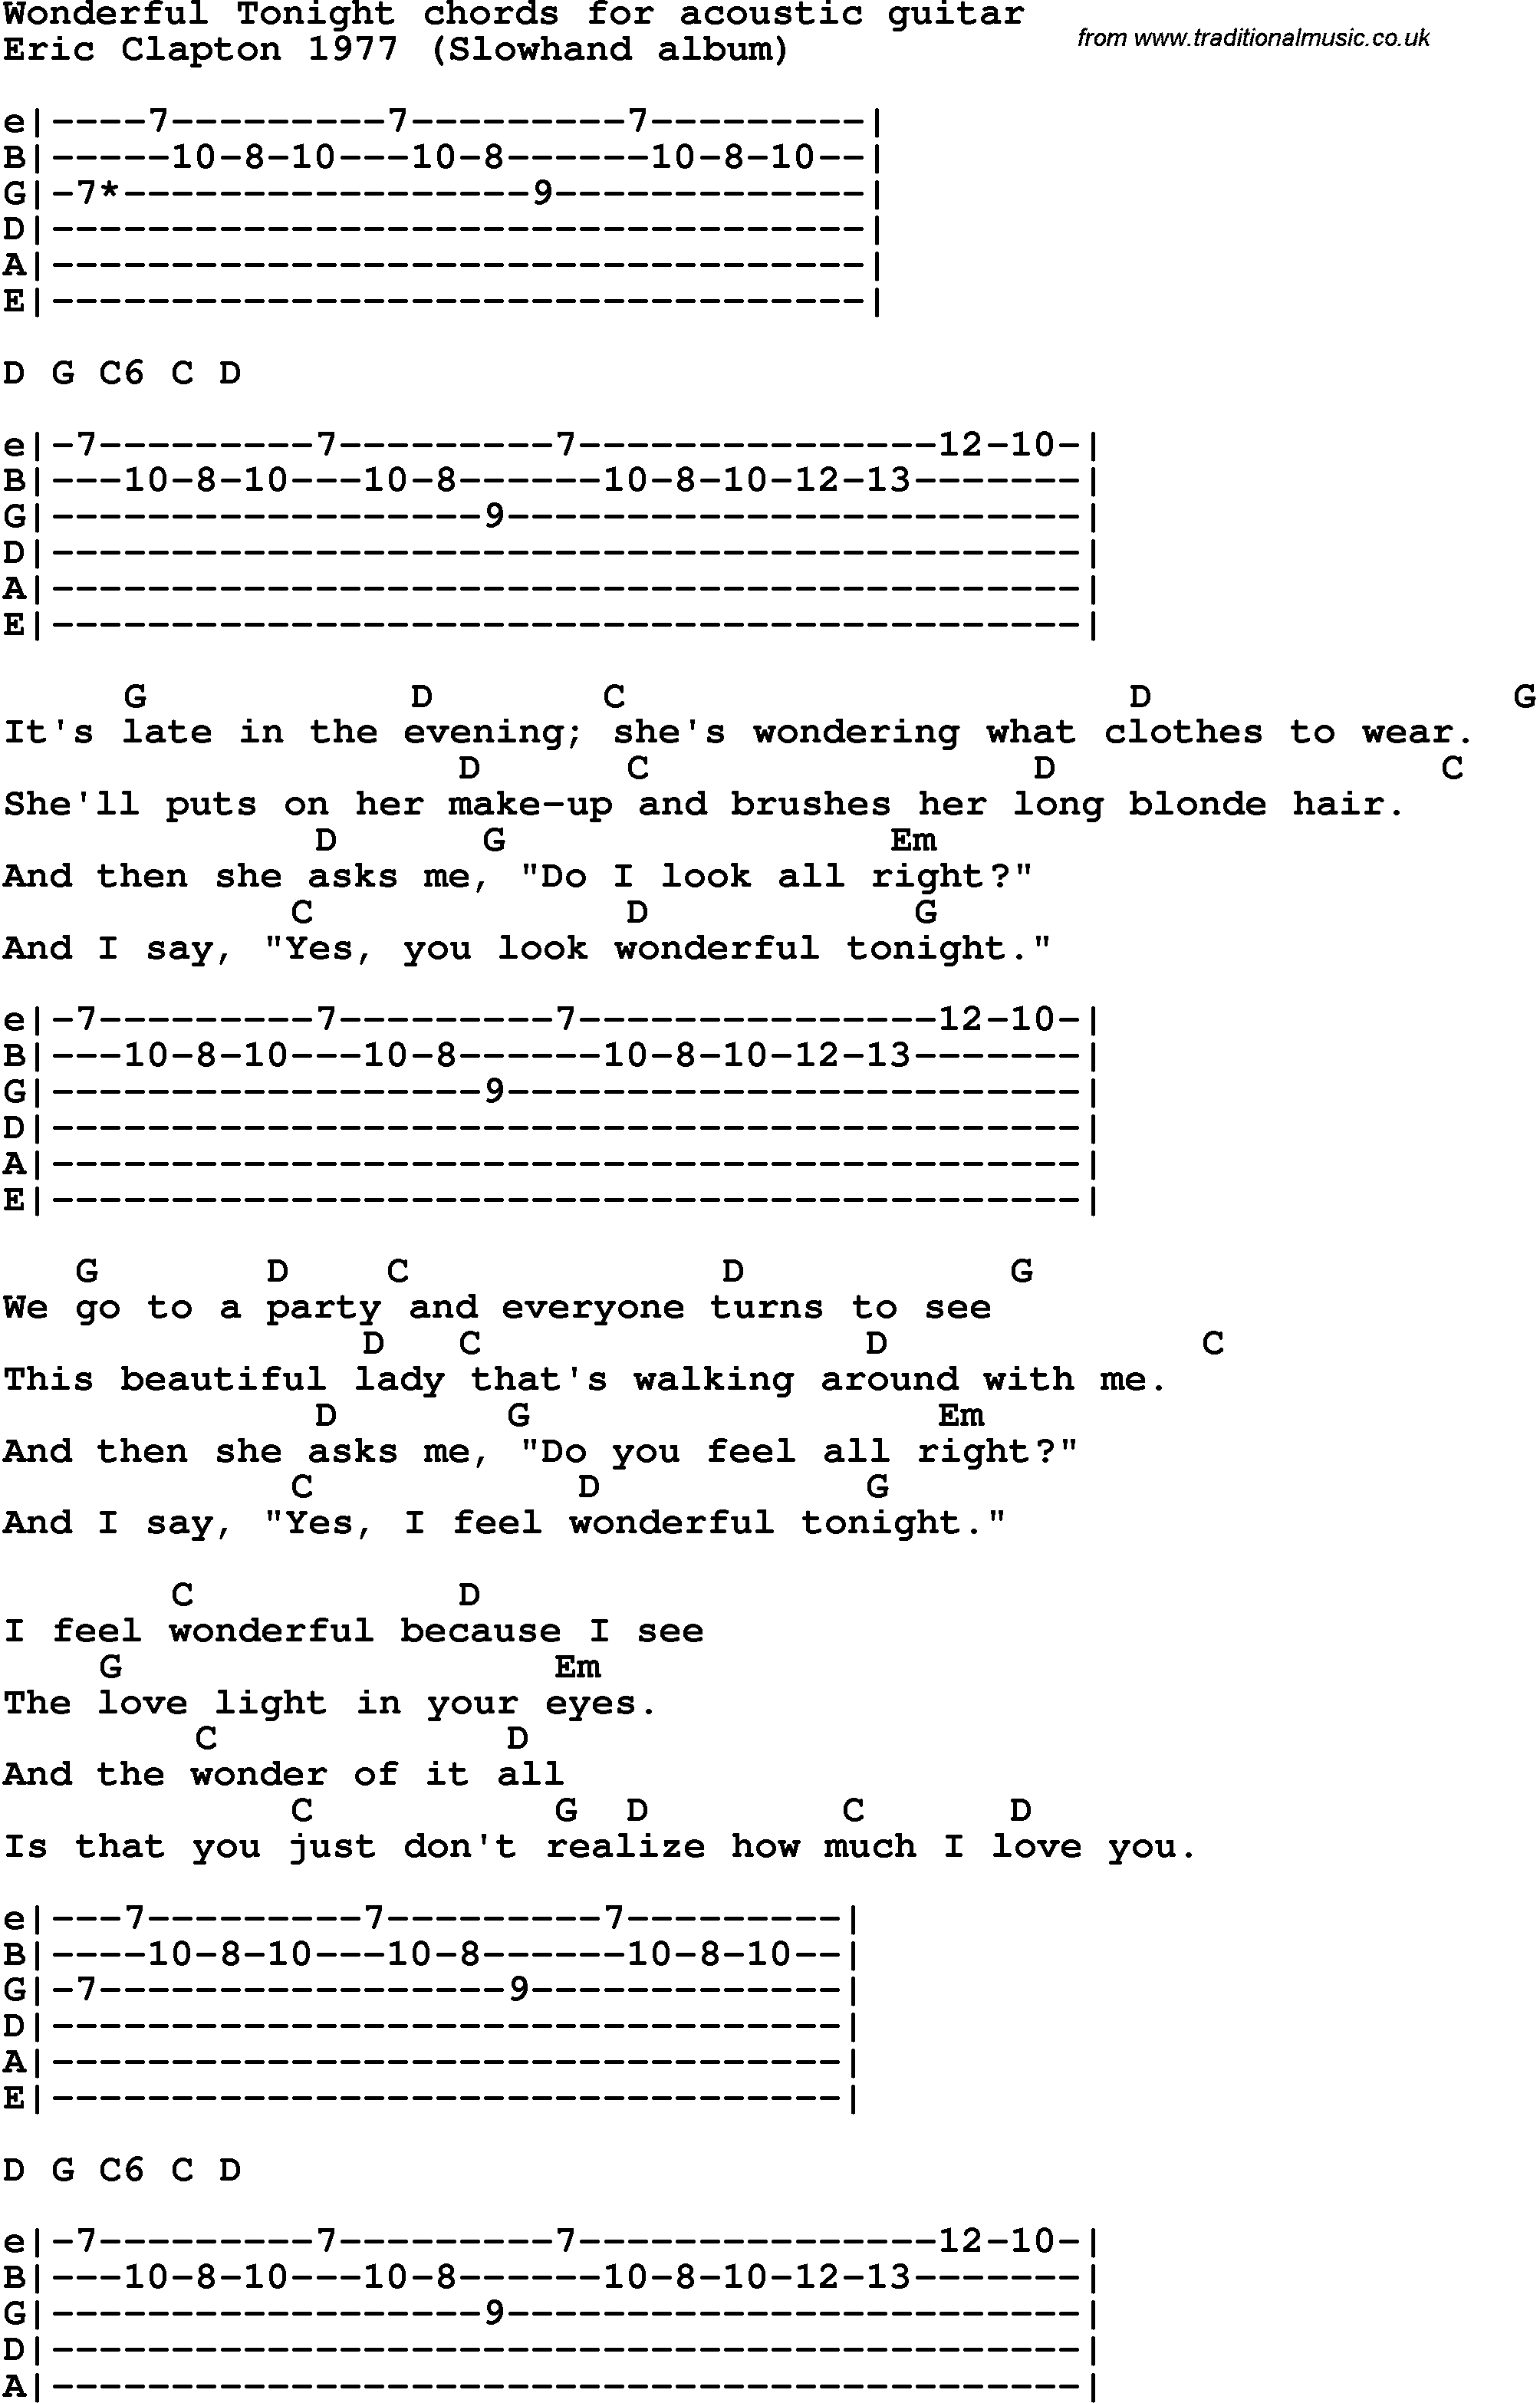 Song Lyrics with guitar chords for Wonderful Tonight